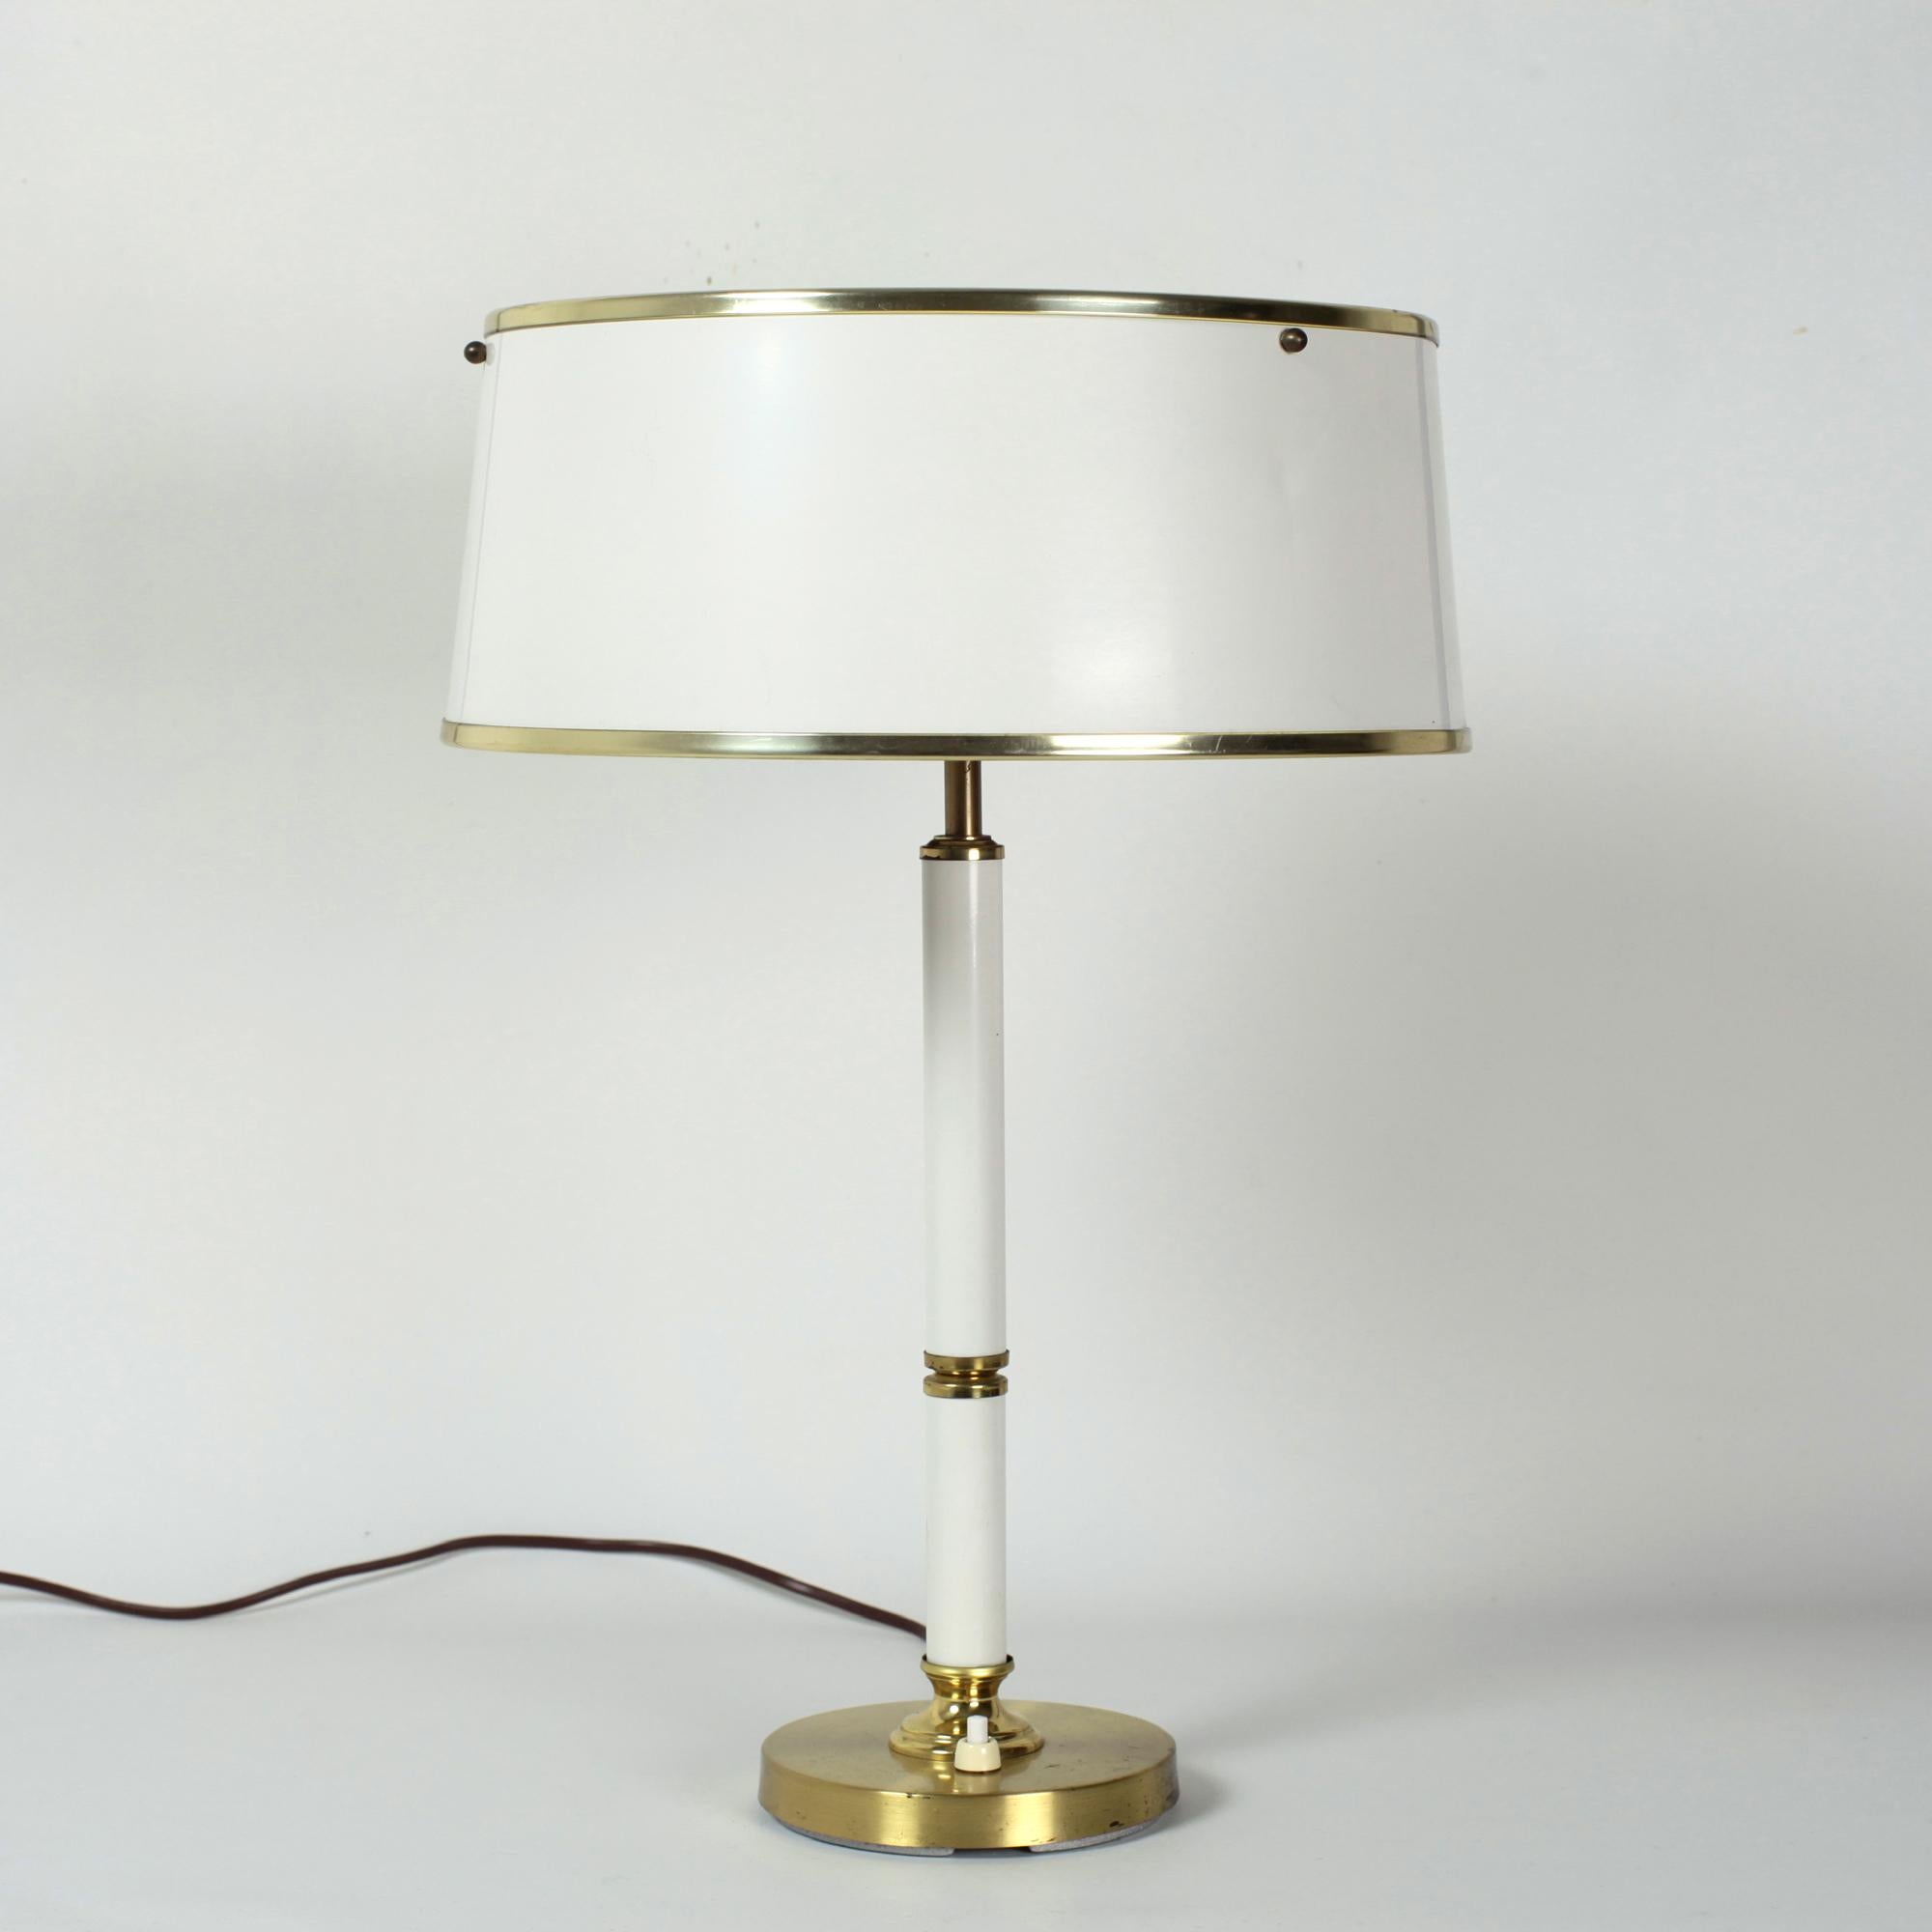 Beautiful table lamp or desk lamp in white lacquered metal and brass manufactured by Boréns Borås in Sweden in the seventies
The Swedish Modern lighting models of Boréns Borås are eternally timeless and timely
2 E27 bulbs
Chic Scandinavian Modern